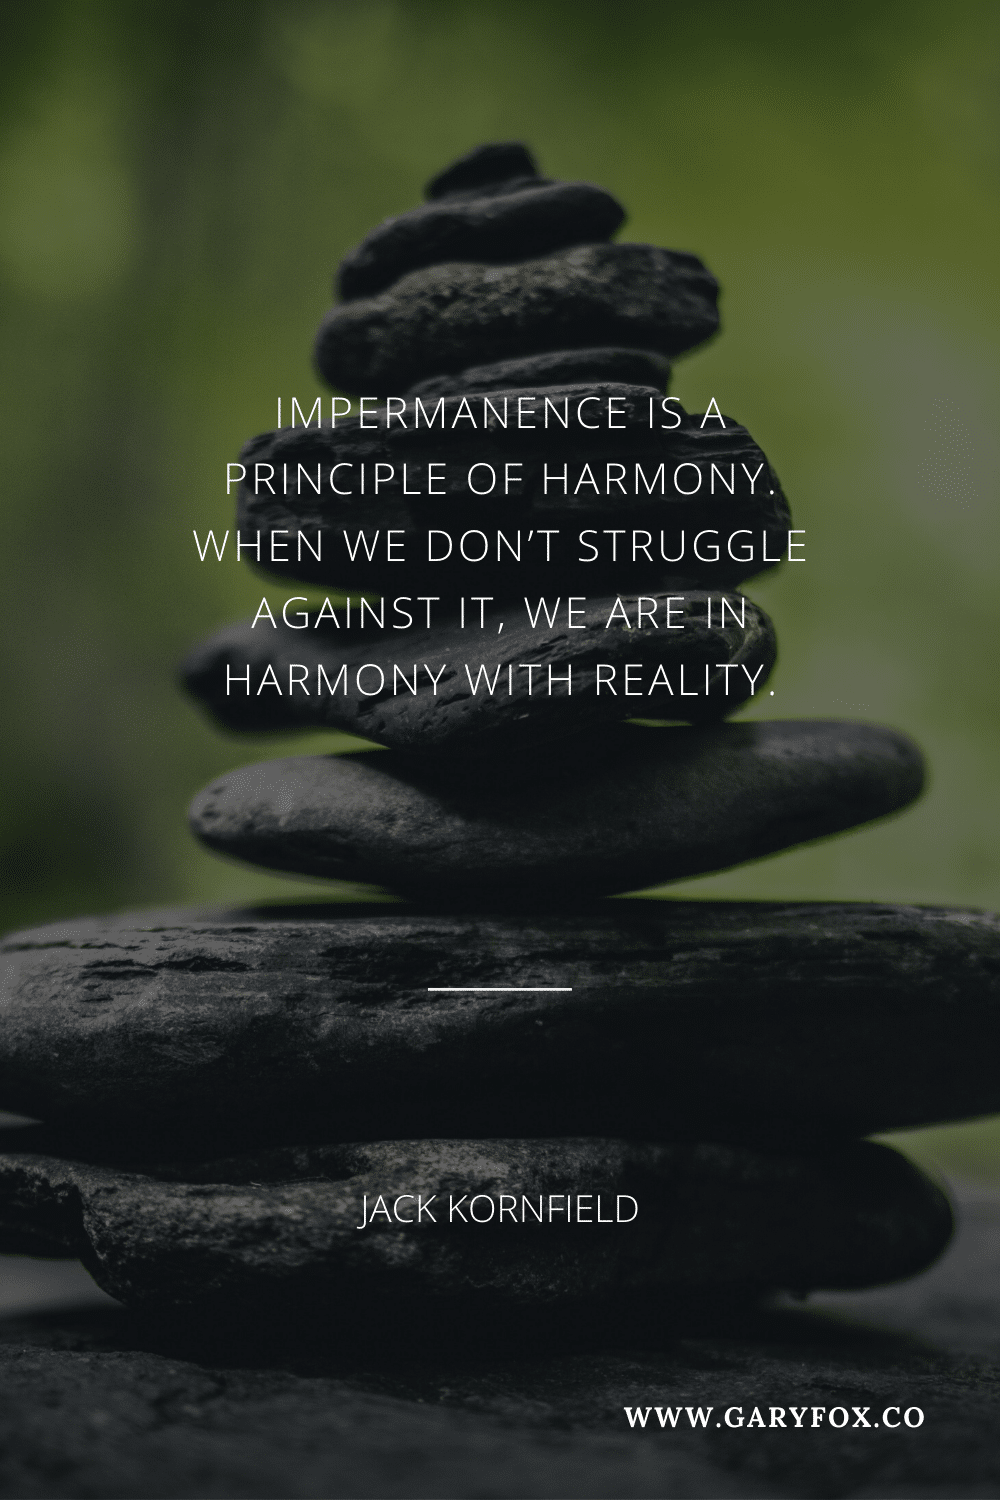 Impermanence Is A Principle Of Harmony. When We Don’t Struggle Against It, We Are In Harmony With Reality.